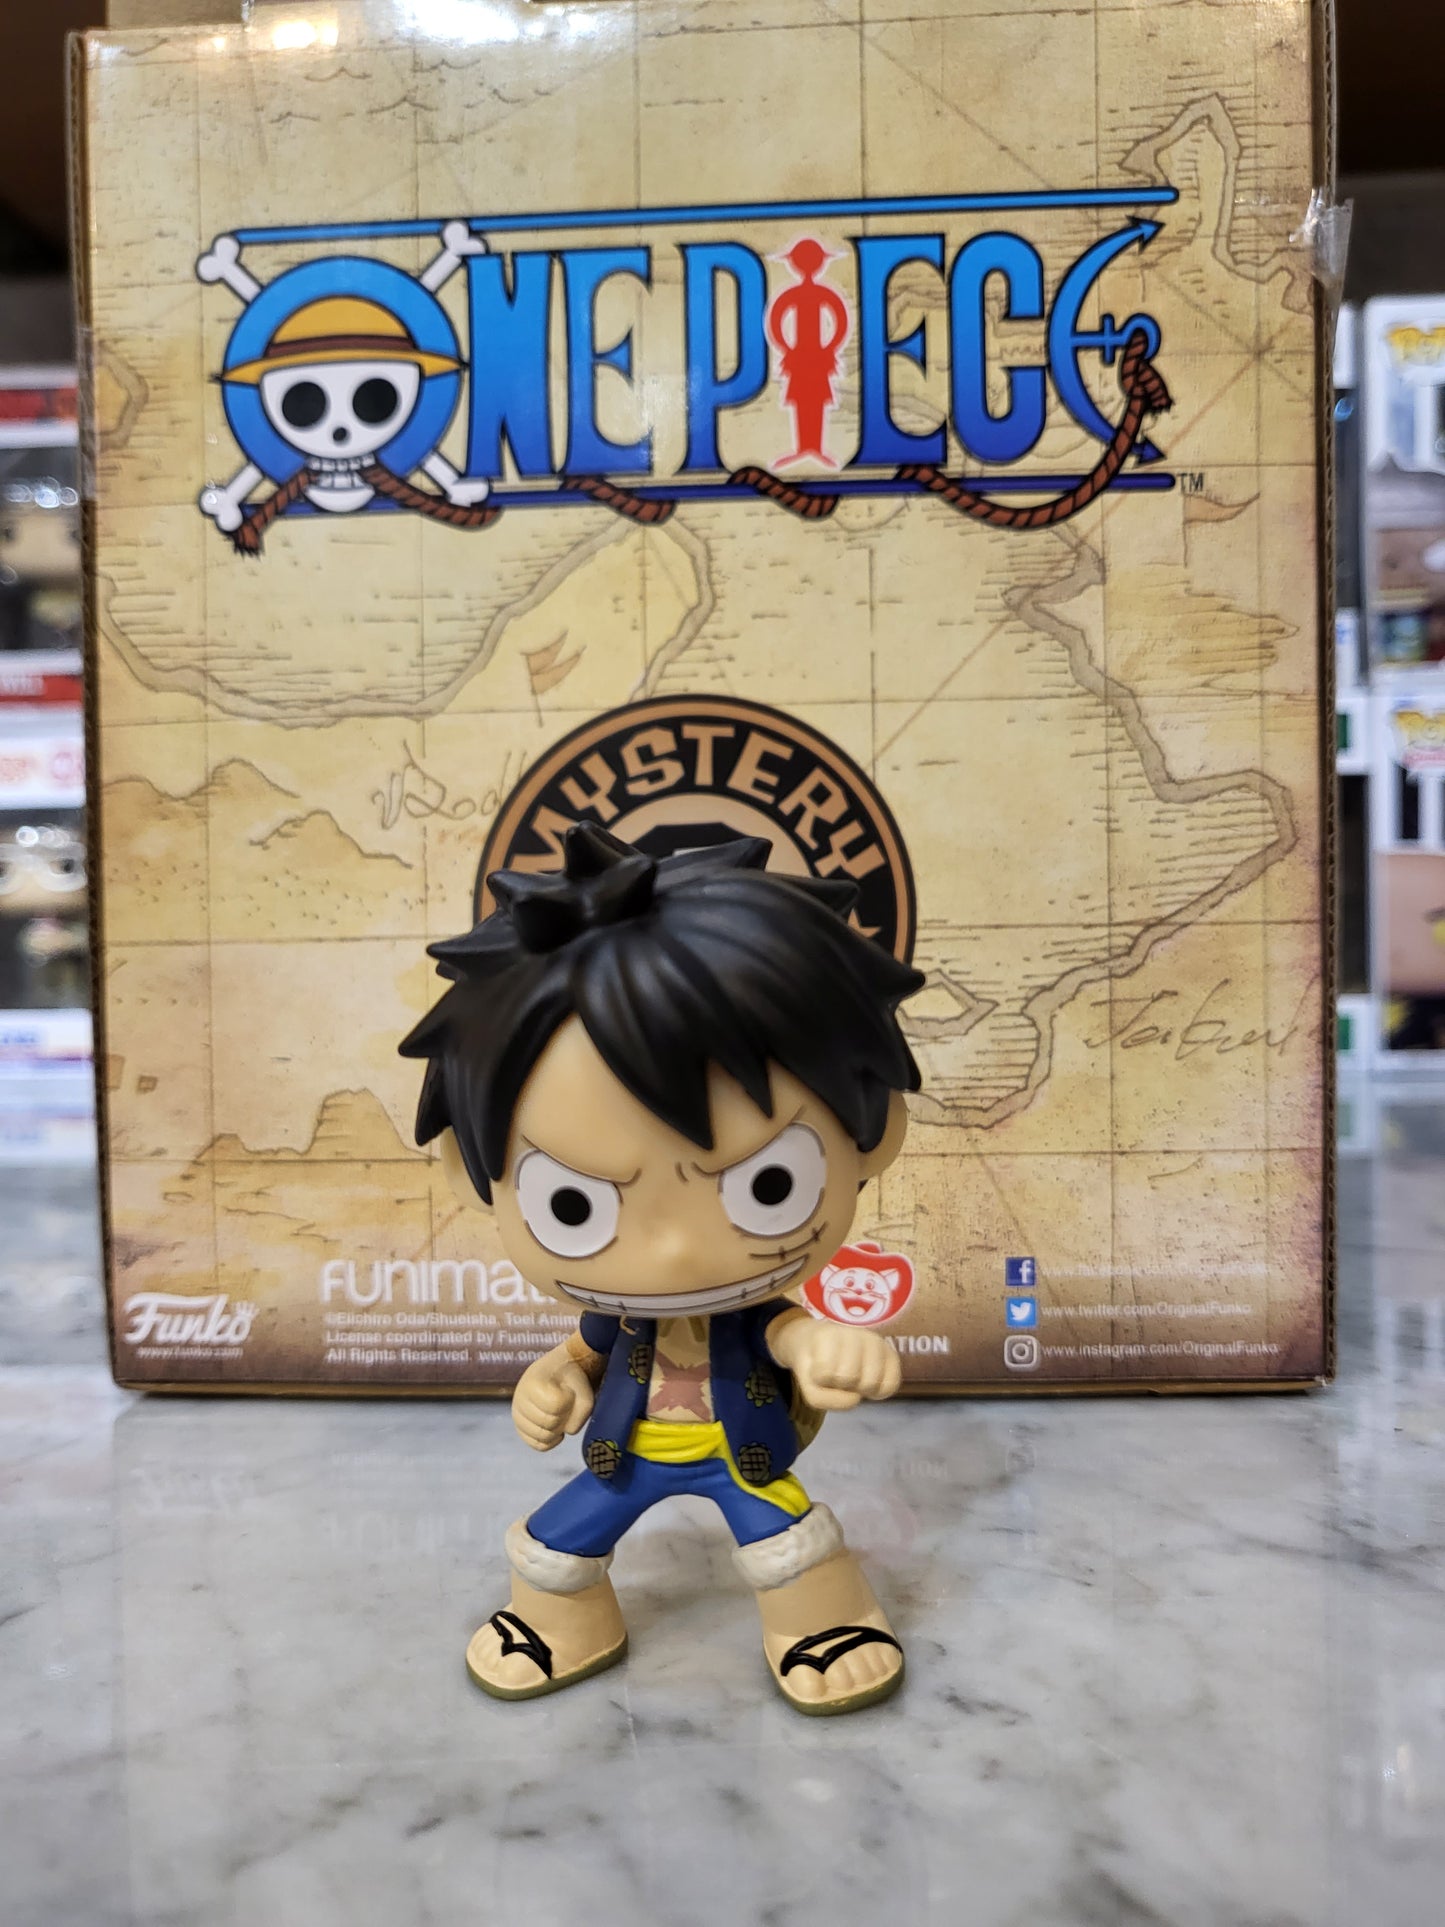 Available now: One Piece Mystery Minis!